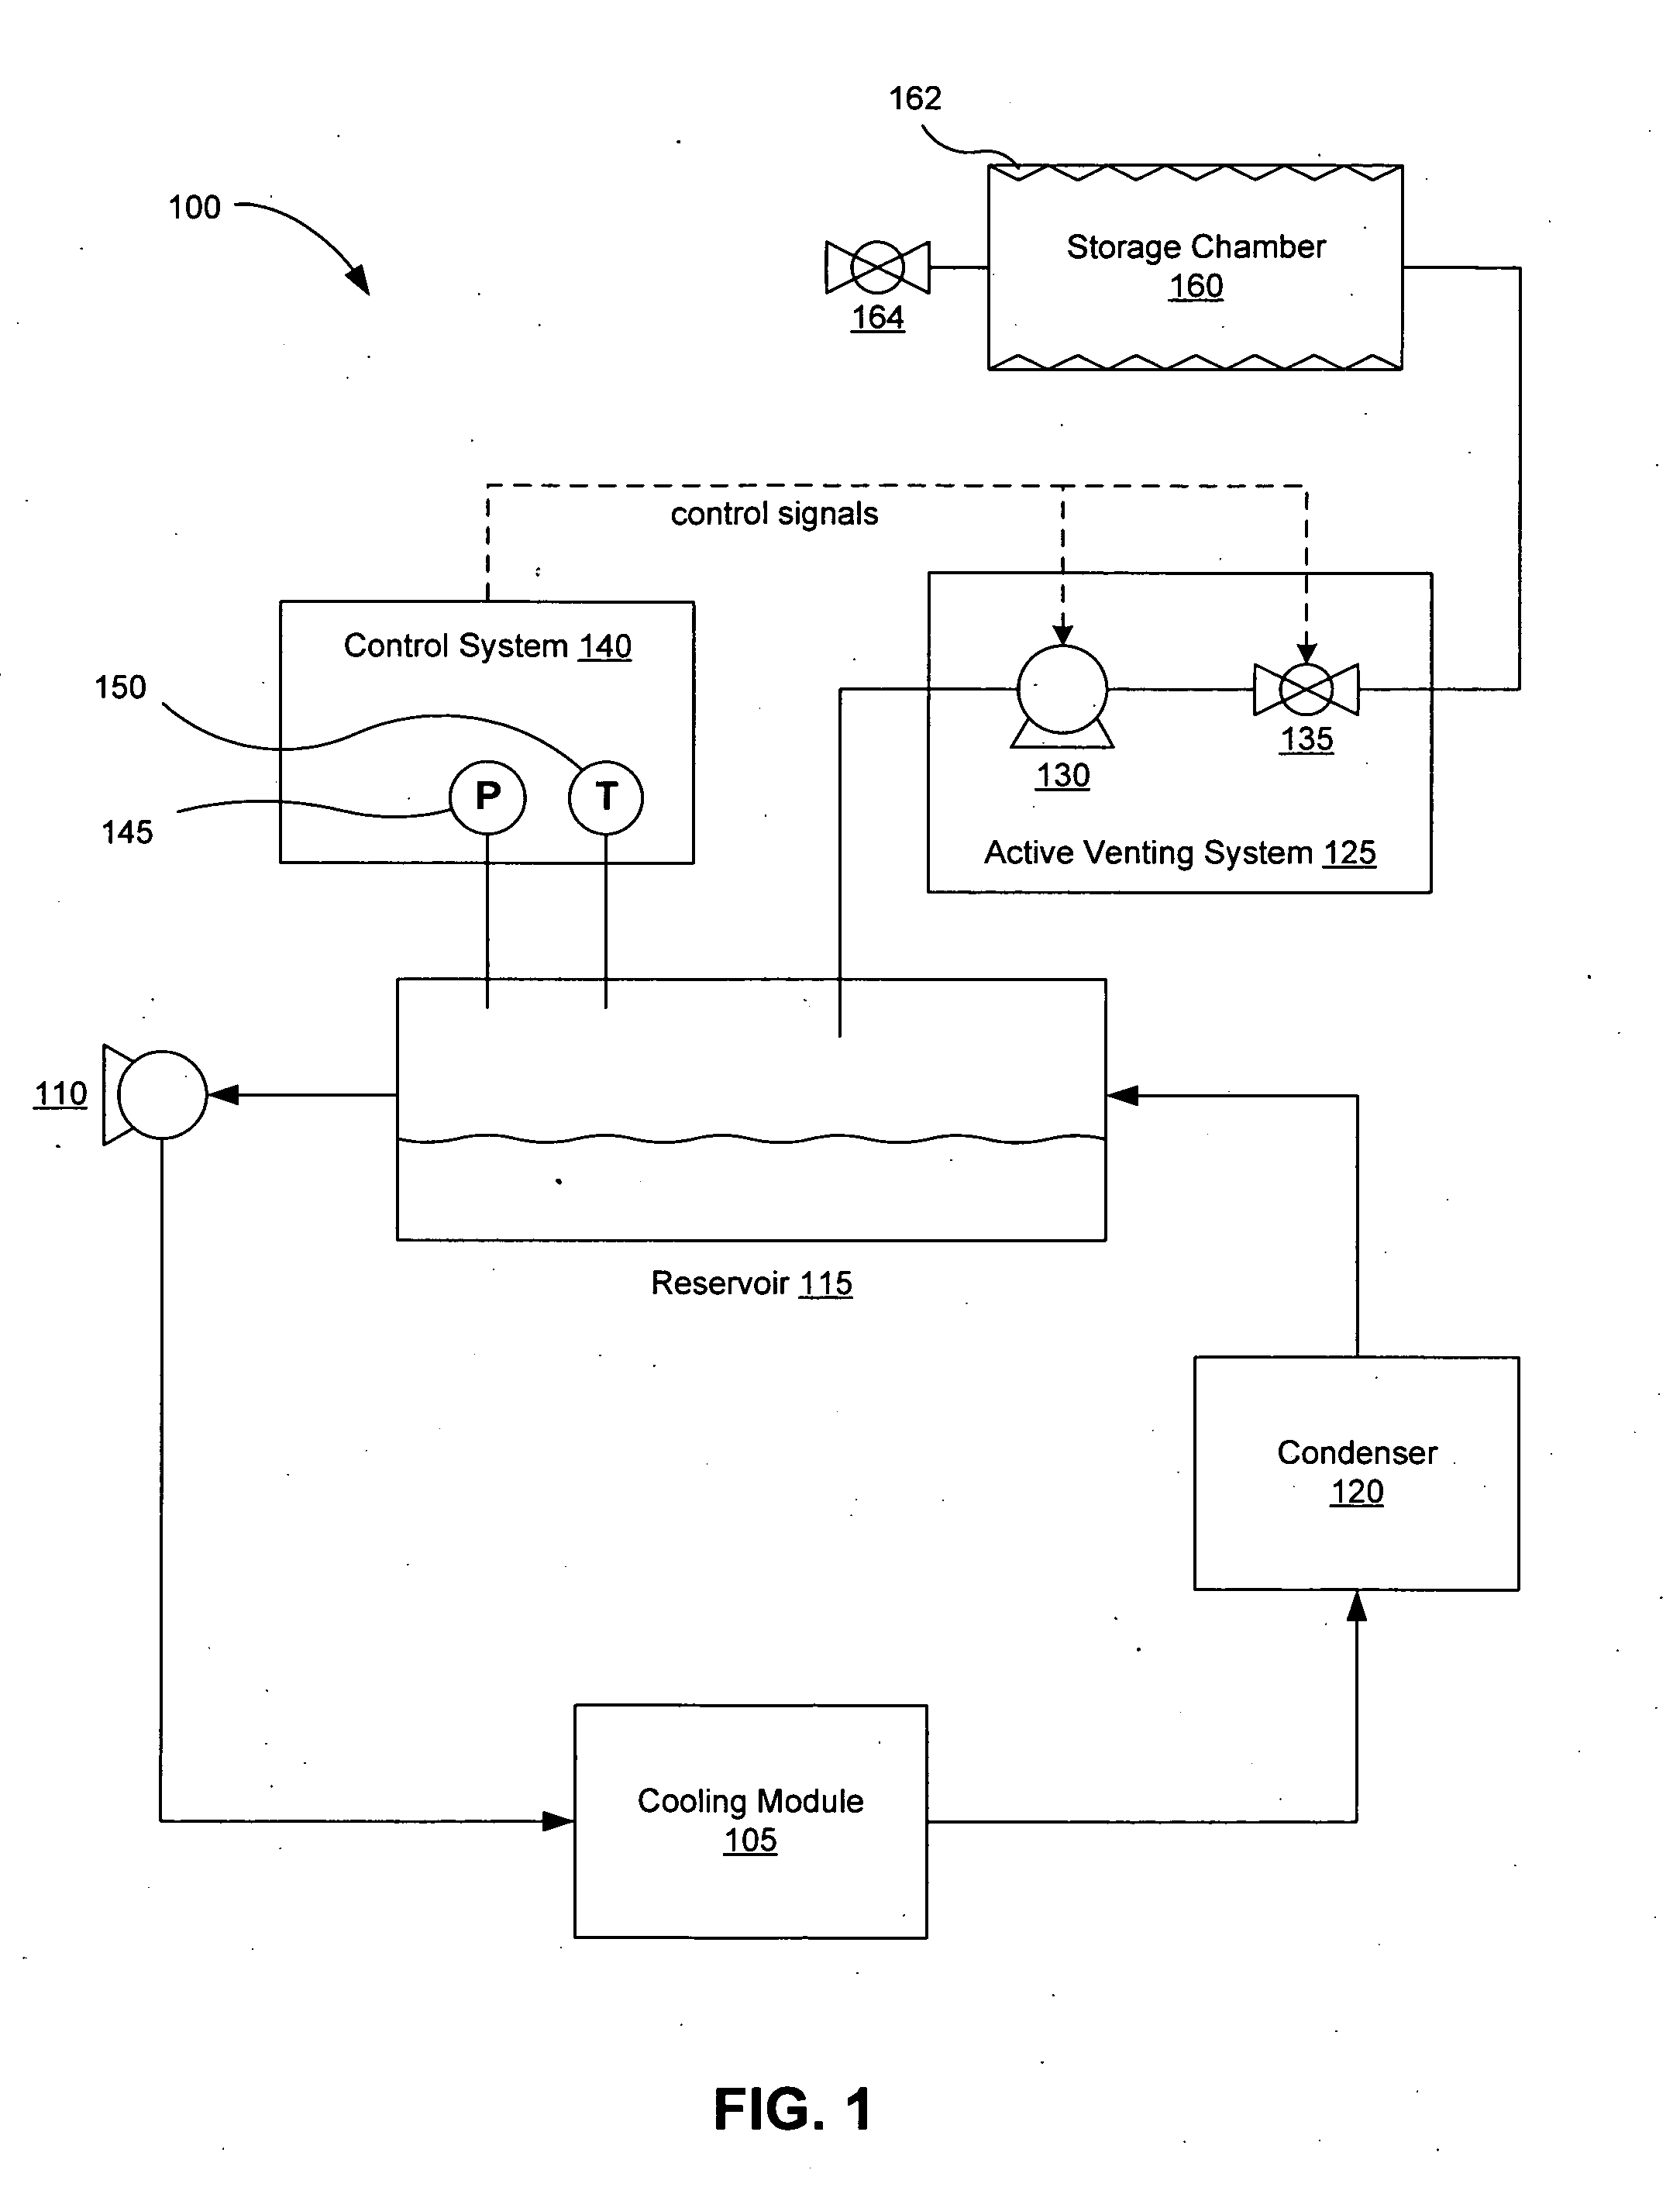 Two-phase liquid cooling system with active venting